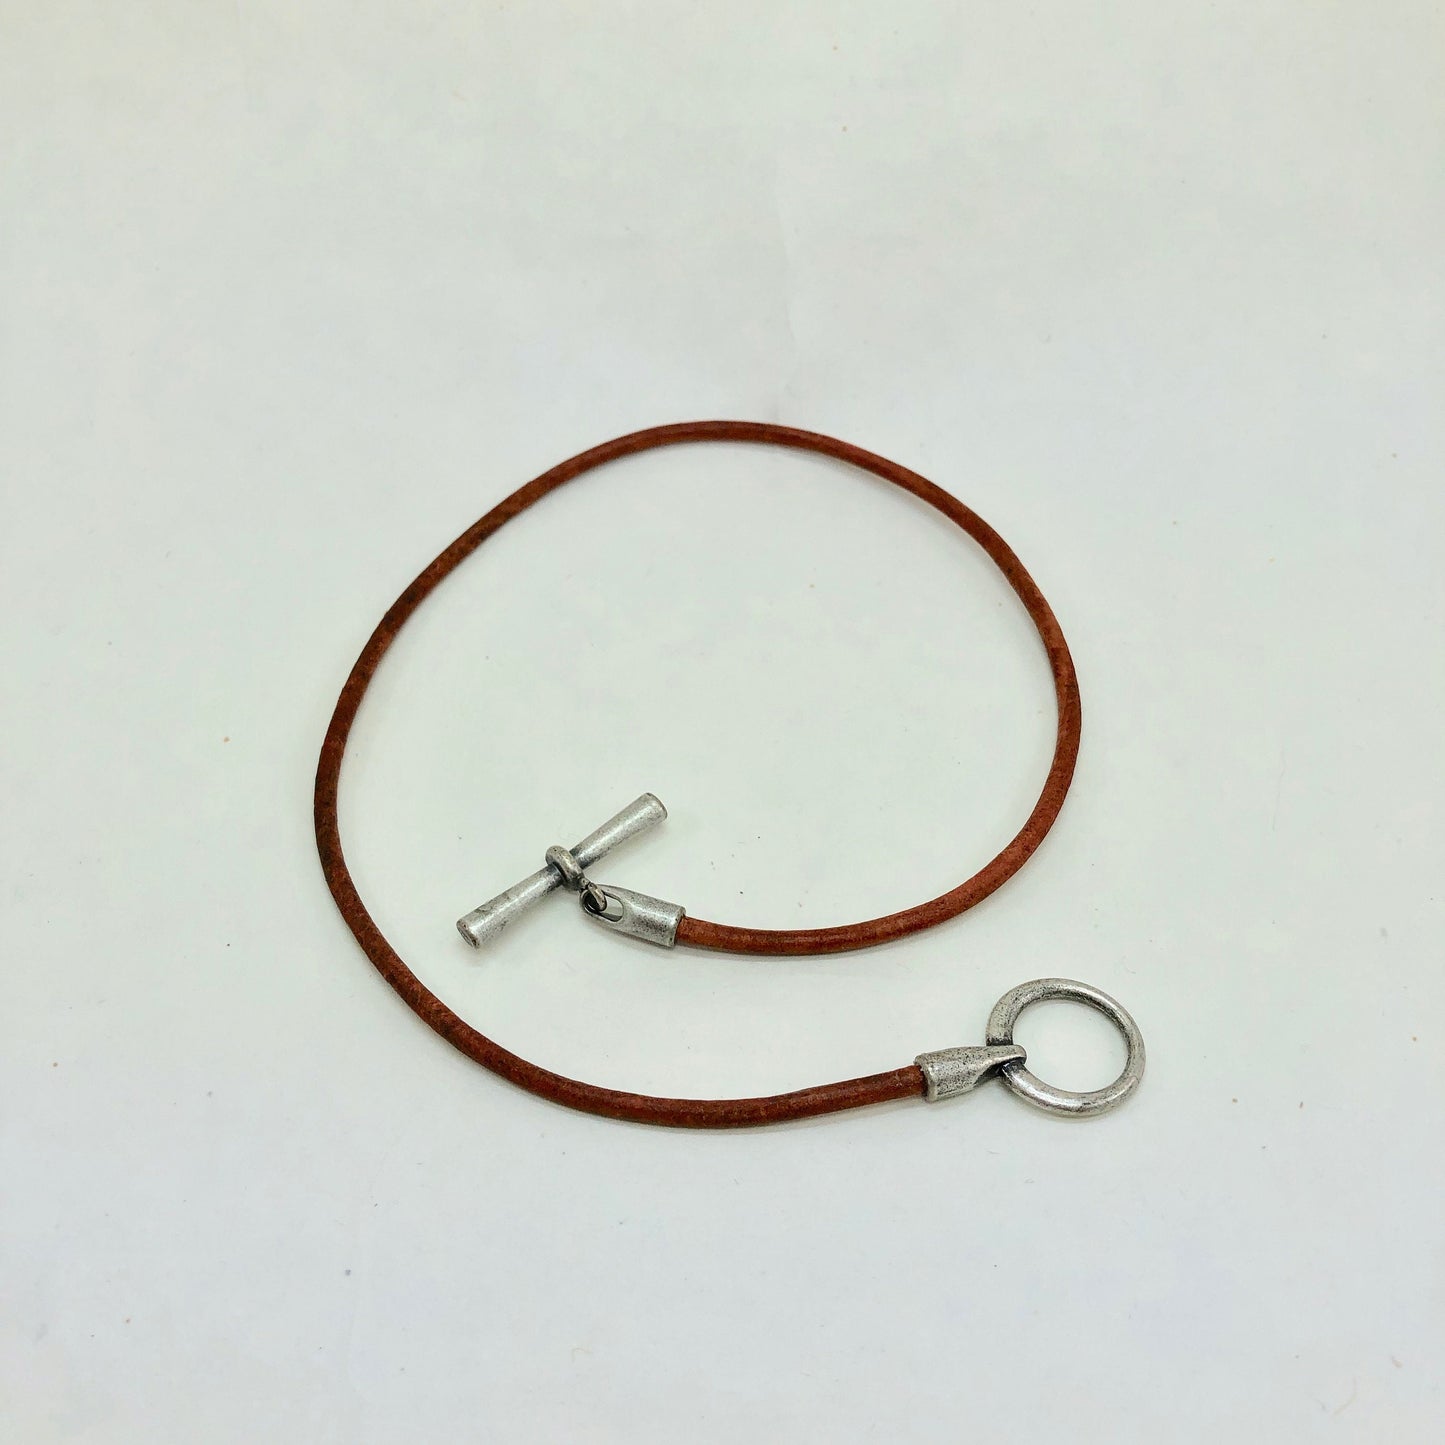 Leather Necklace. Hip brown Italian leather choker necklace fashioned with a center silver toggle clasp.